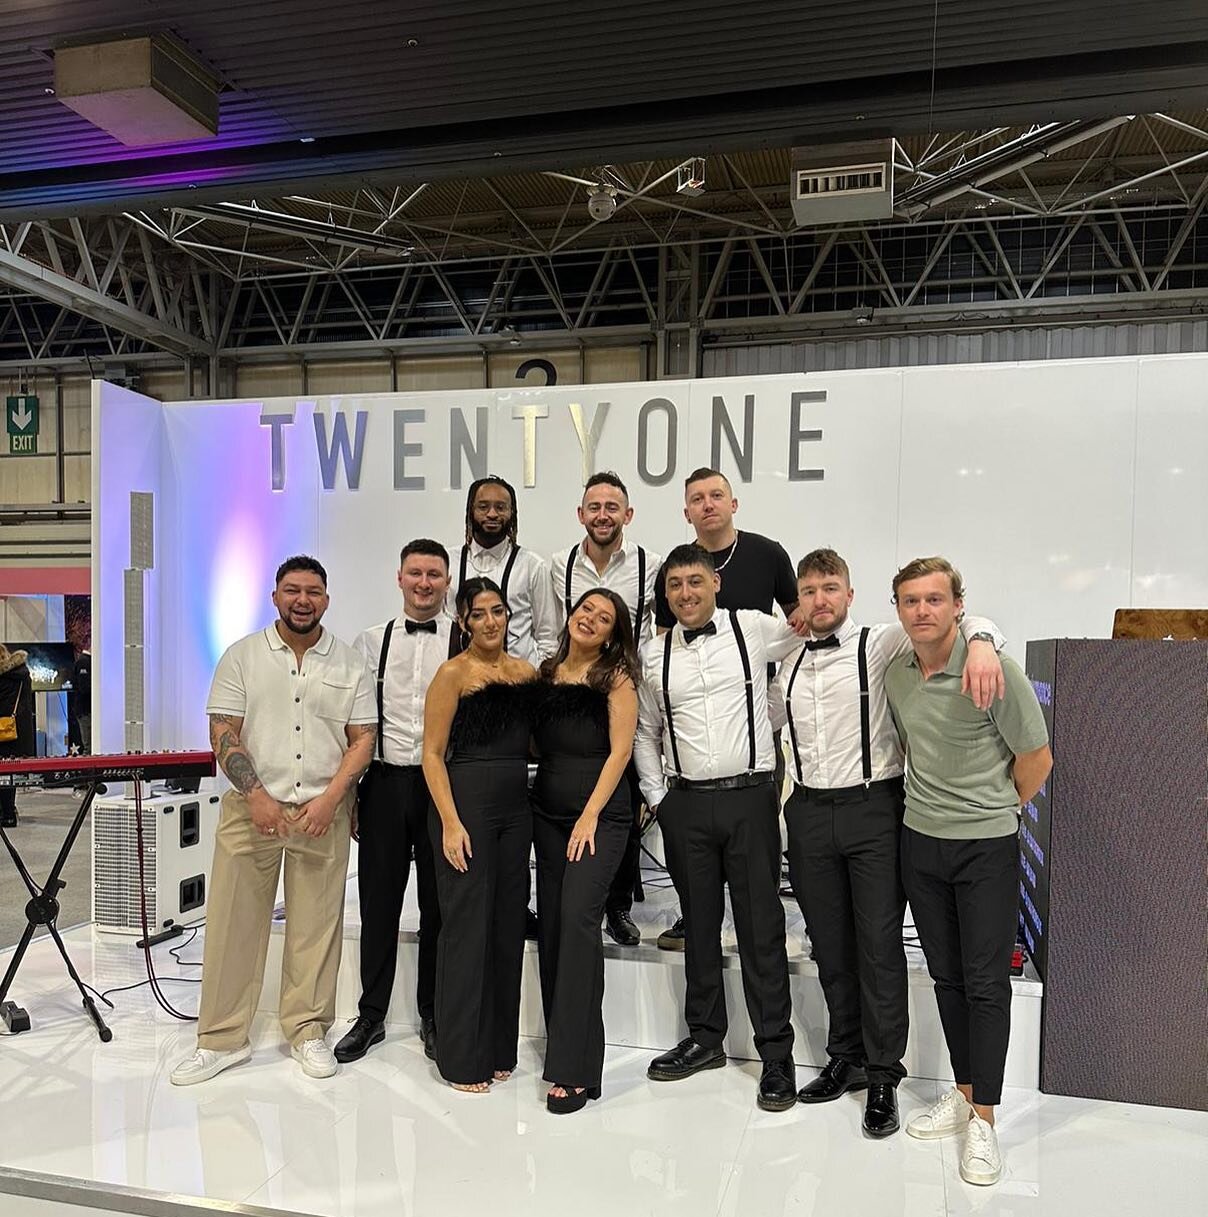 MASSIVE shout out to our team who smashed it at this weekends @thenationalweddingshow we are seriously proud of this crazily talented bunch 🙌

And, of course, thanks to YOU our audience for dancing with us all weekend 🤍 we couldn&rsquo;t do what we